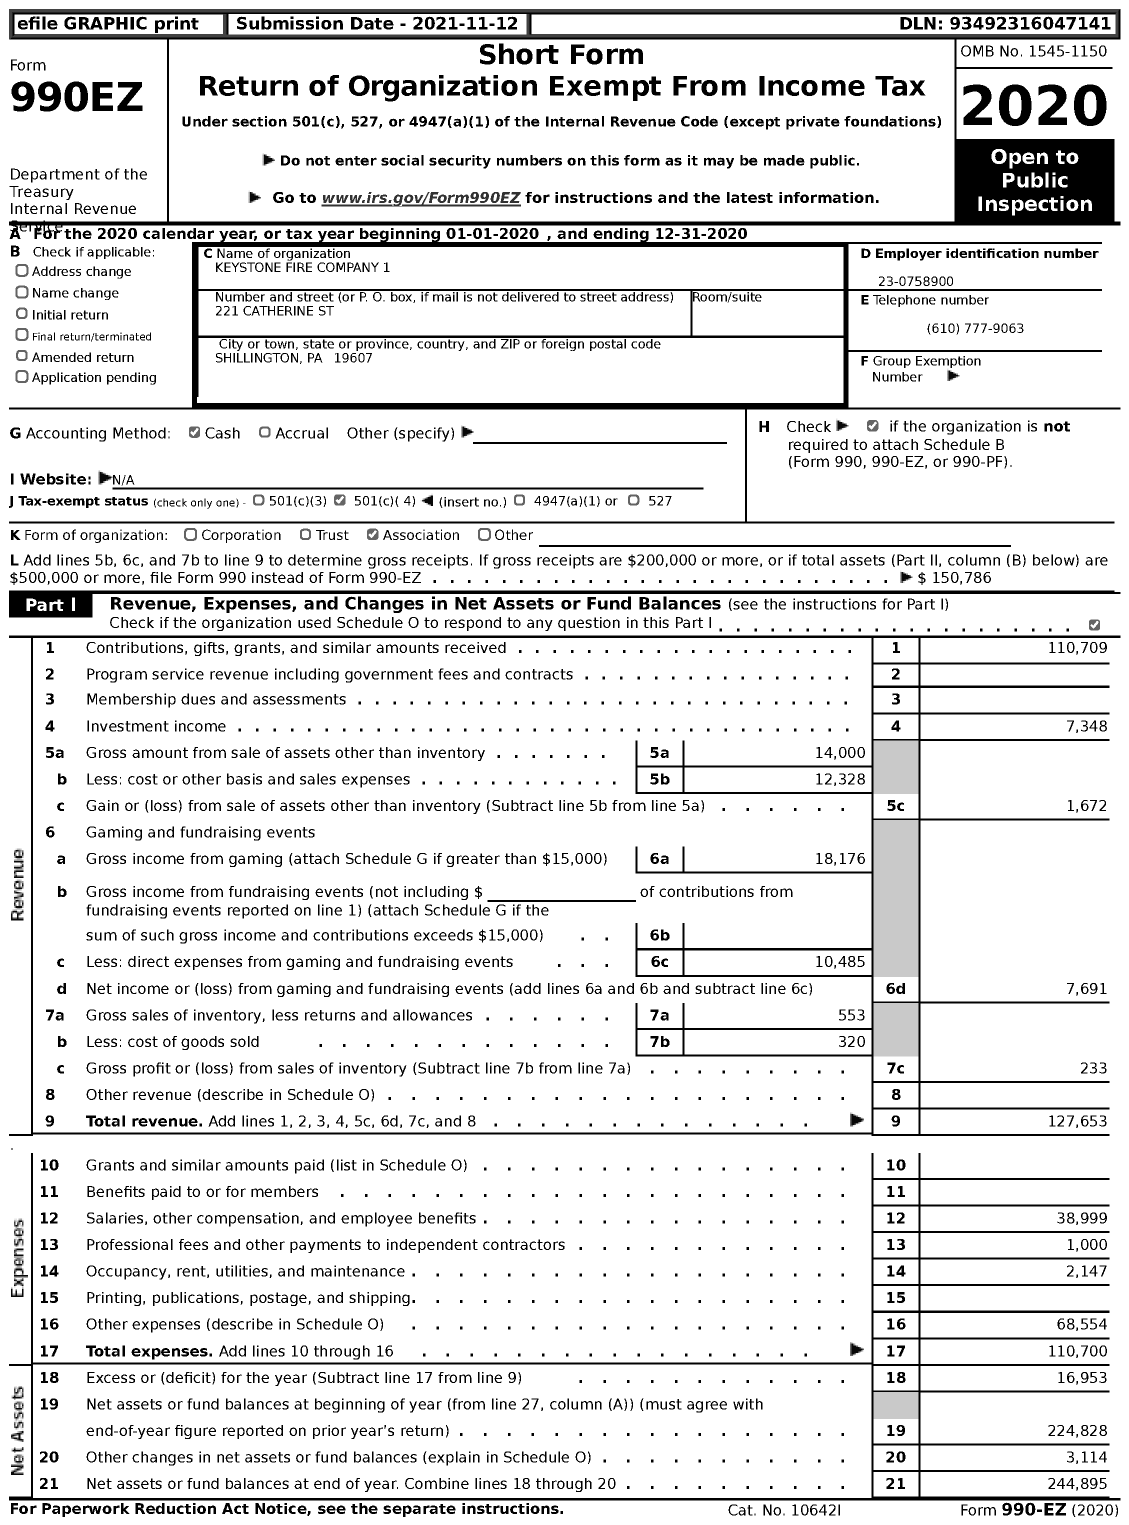 Image of first page of 2020 Form 990EZ for Keystone Fire Company 1